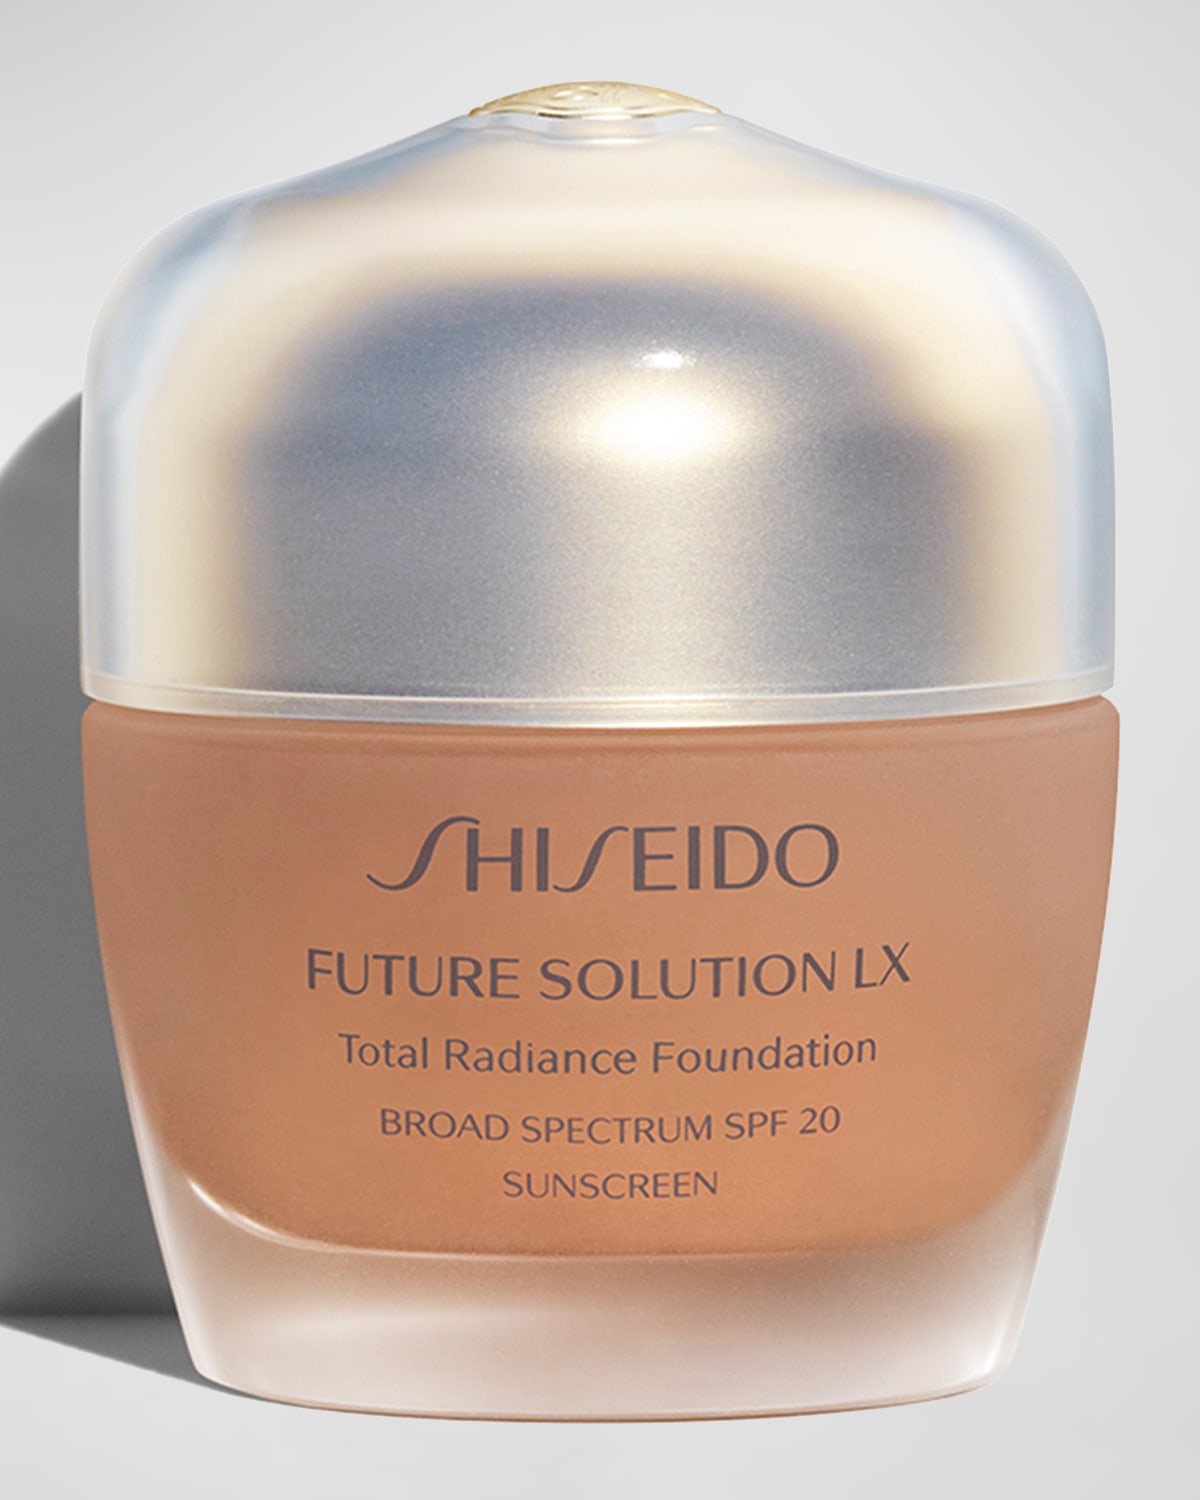 Future Solution LX Total Radiance Foundation SPF 20